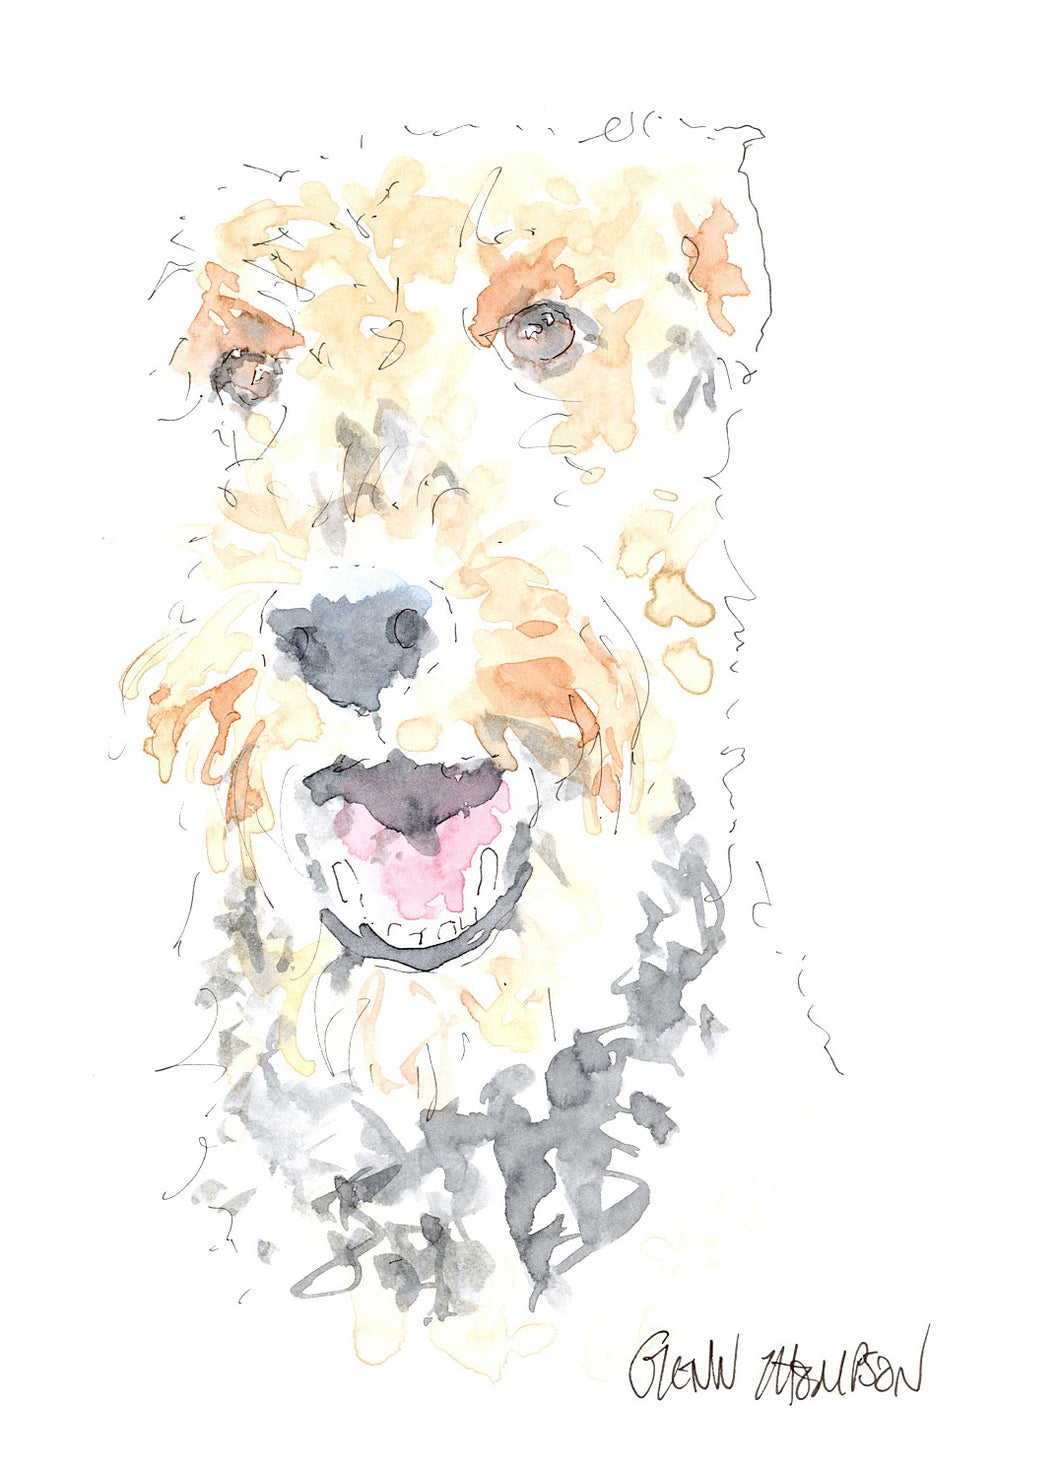 Airedale watercolour - by artist Glenn Thompson from Belfast Northern Ireland